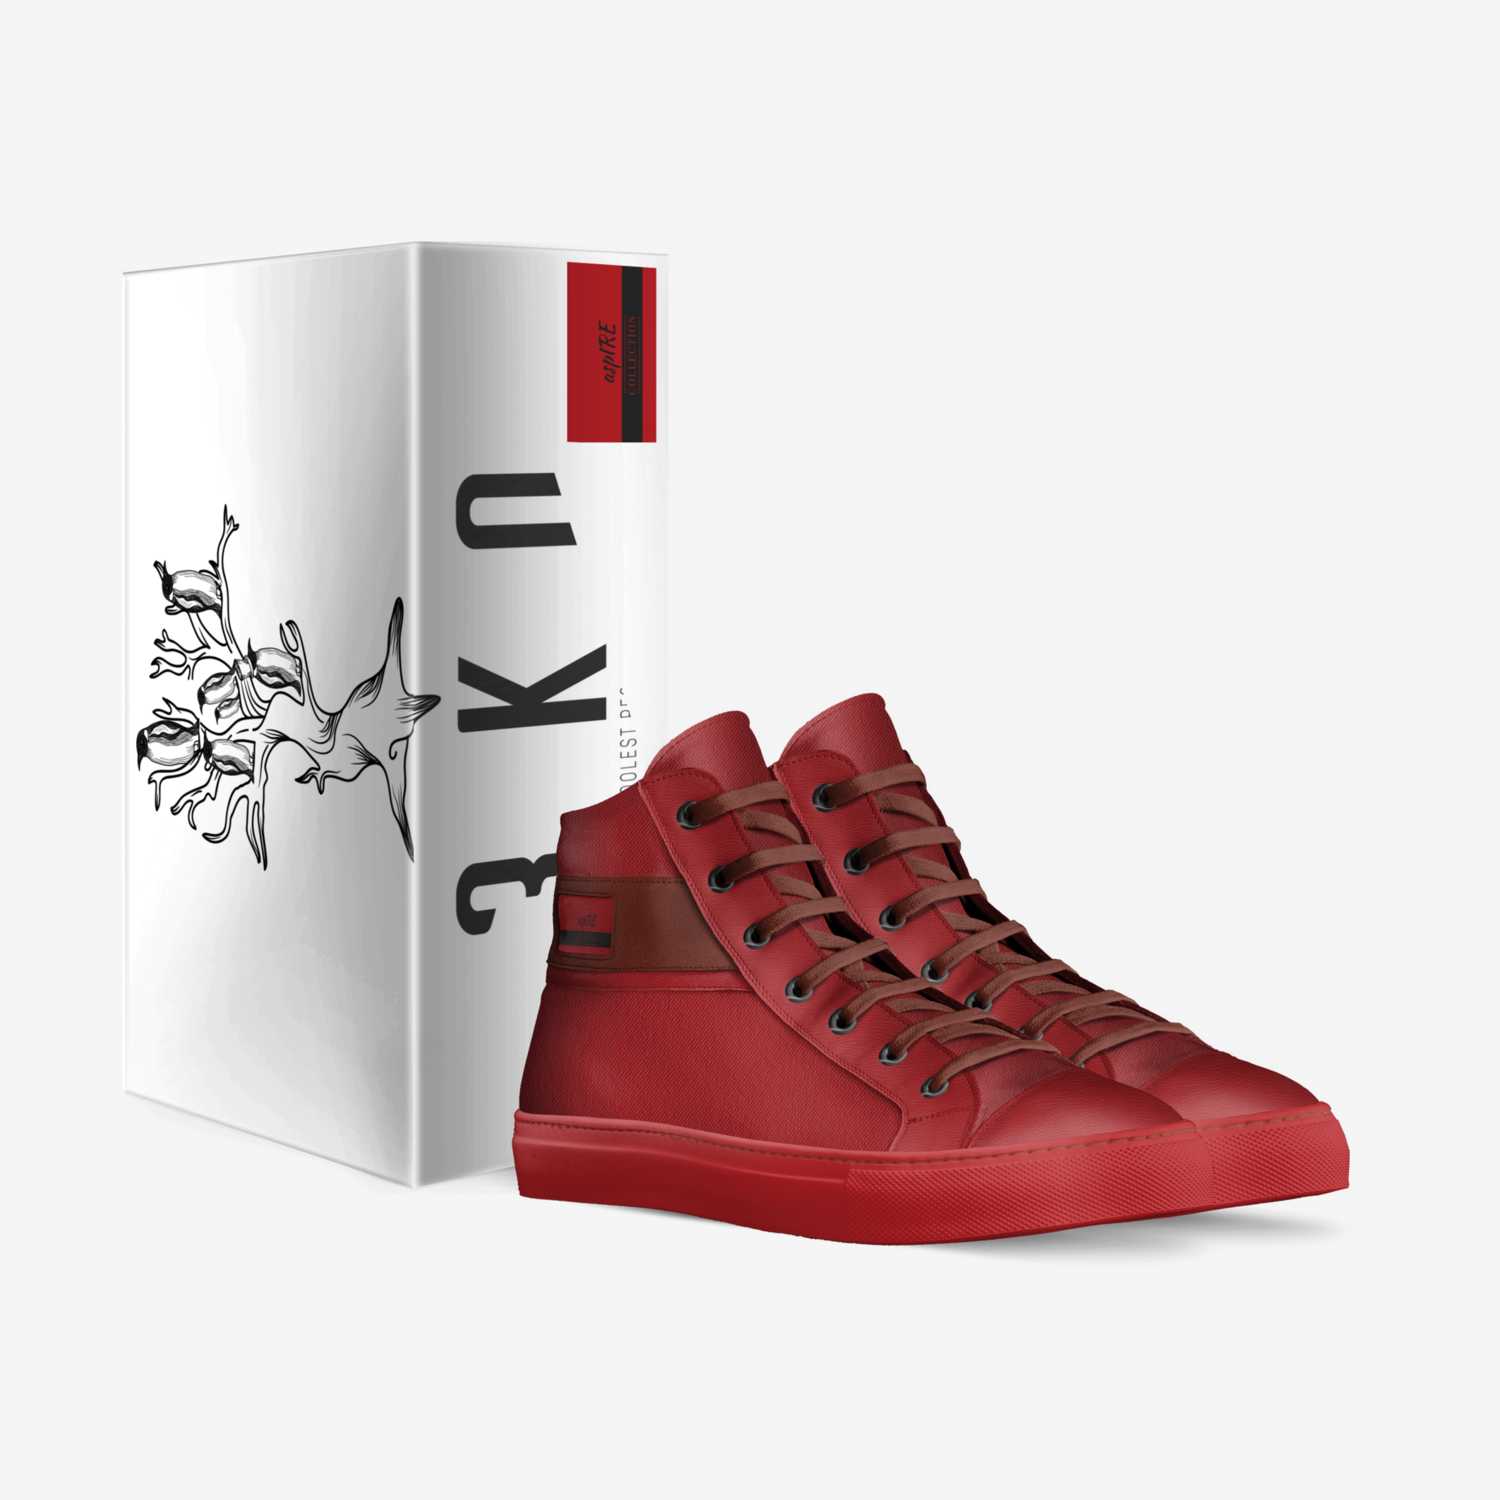 aspIRE's custom made in Italy shoes by Chad Pierce | Box view